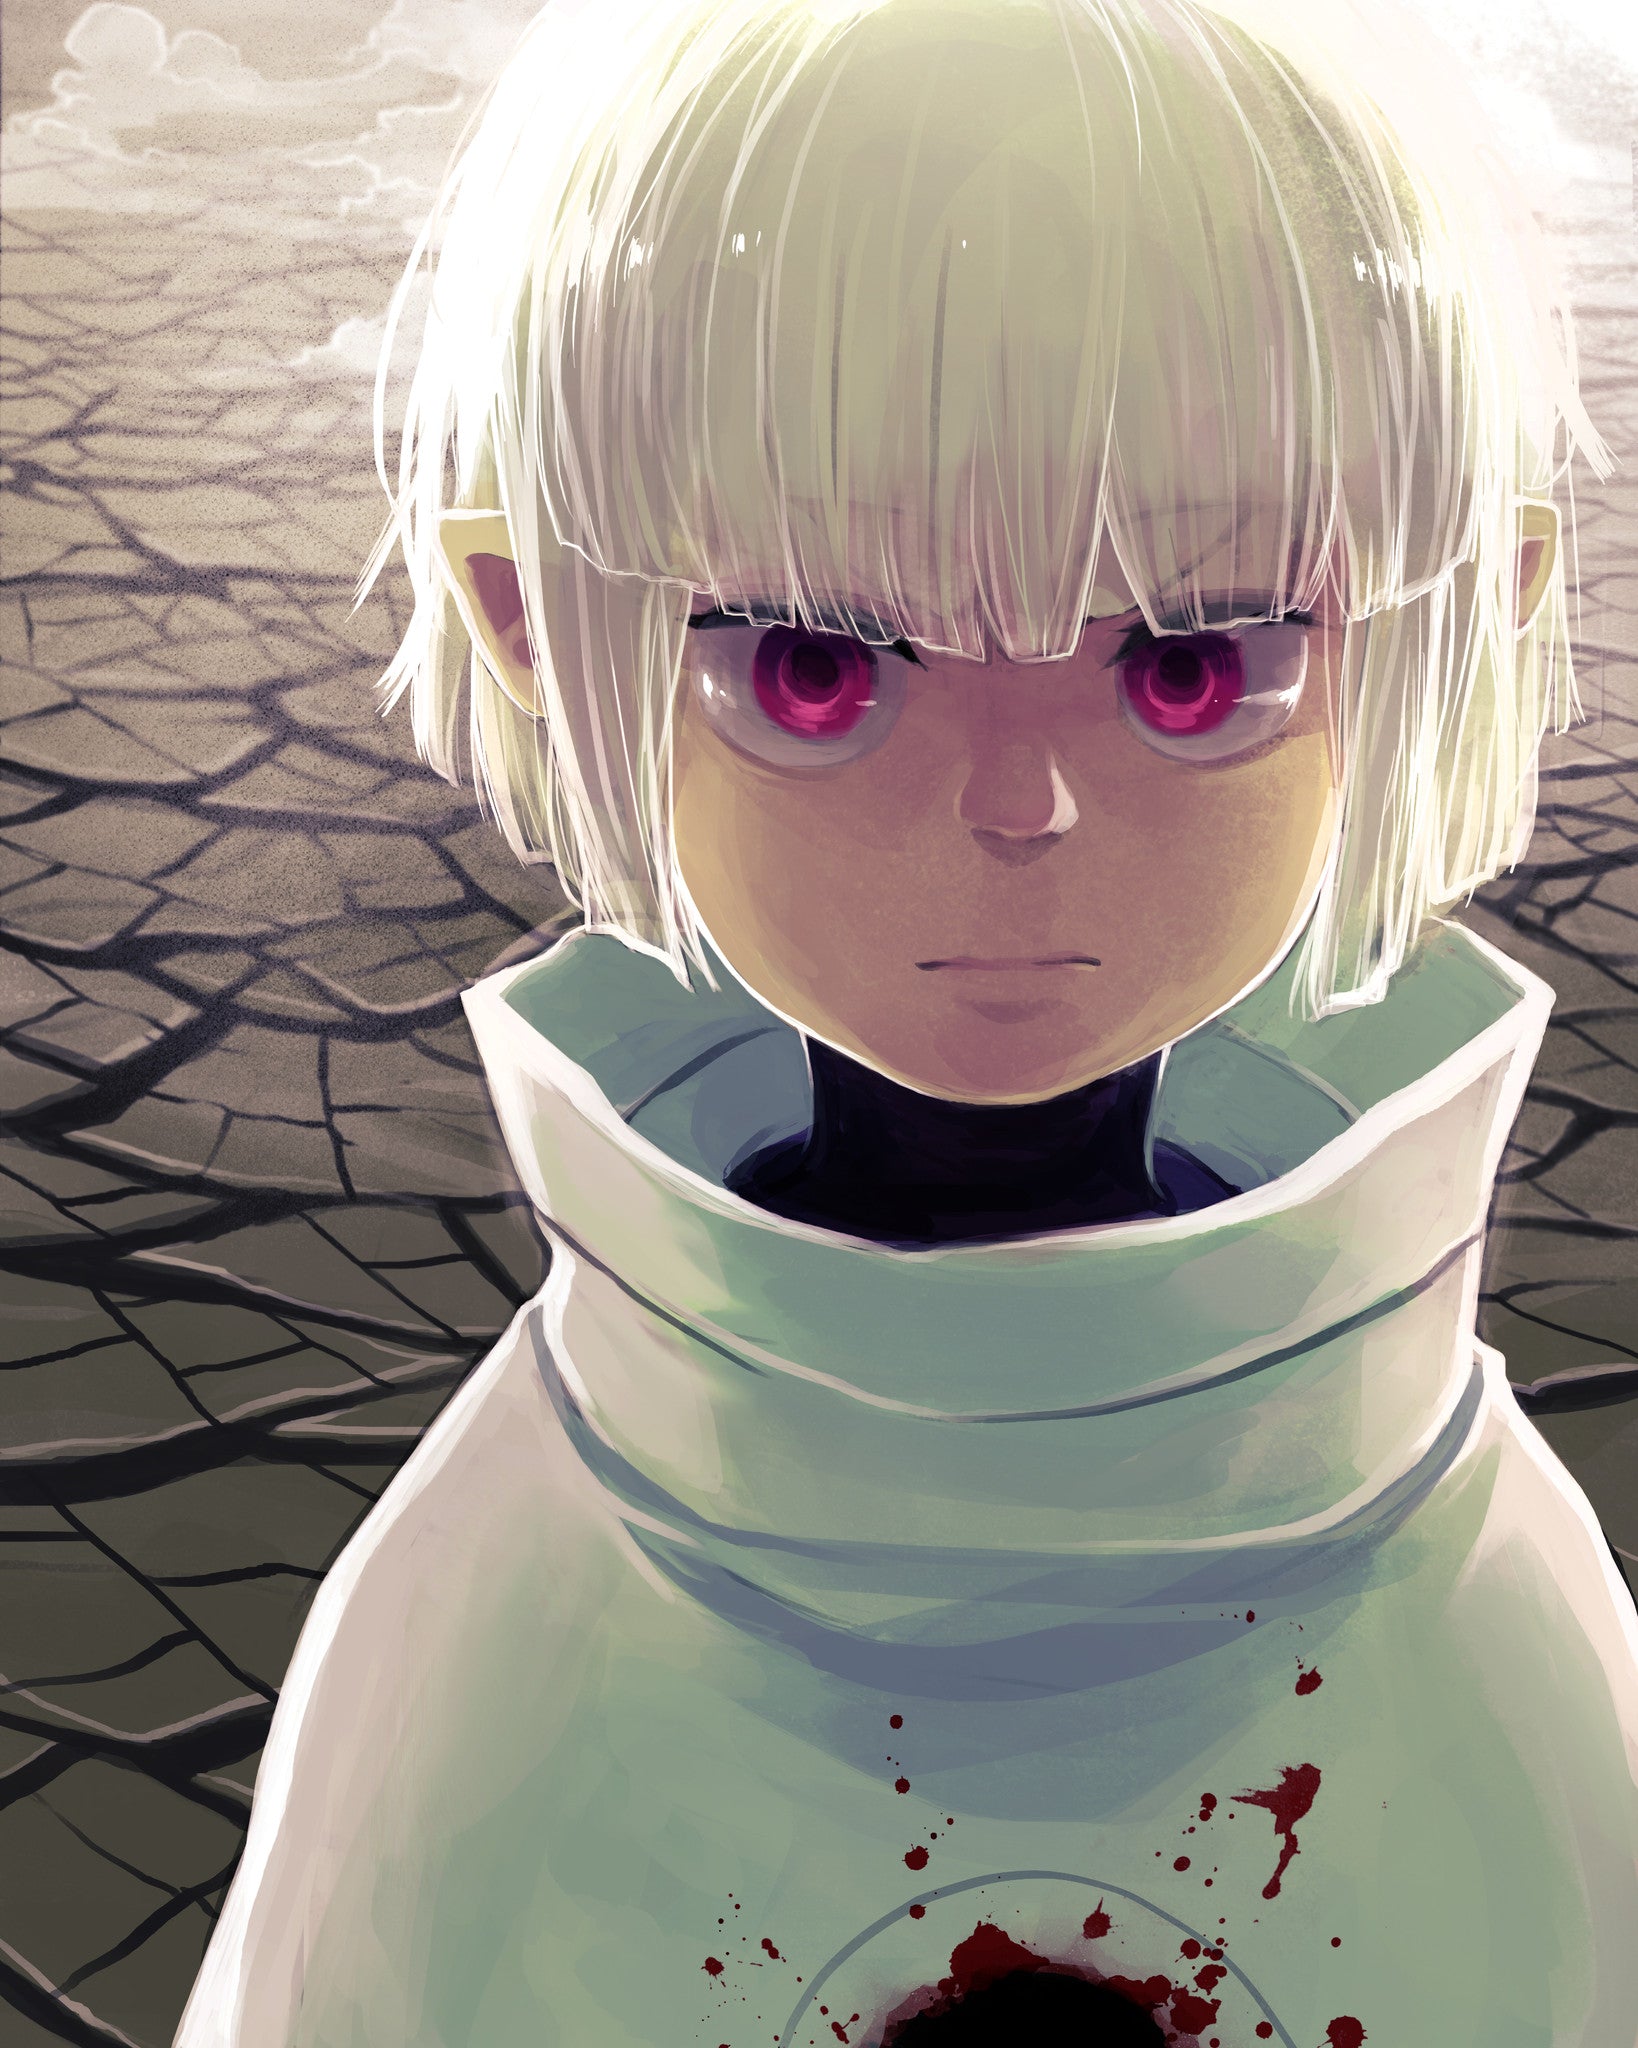 The Boy Who Fell - The Blood Demon Print from The Boy Who Fell - Webcomic Merchandise 